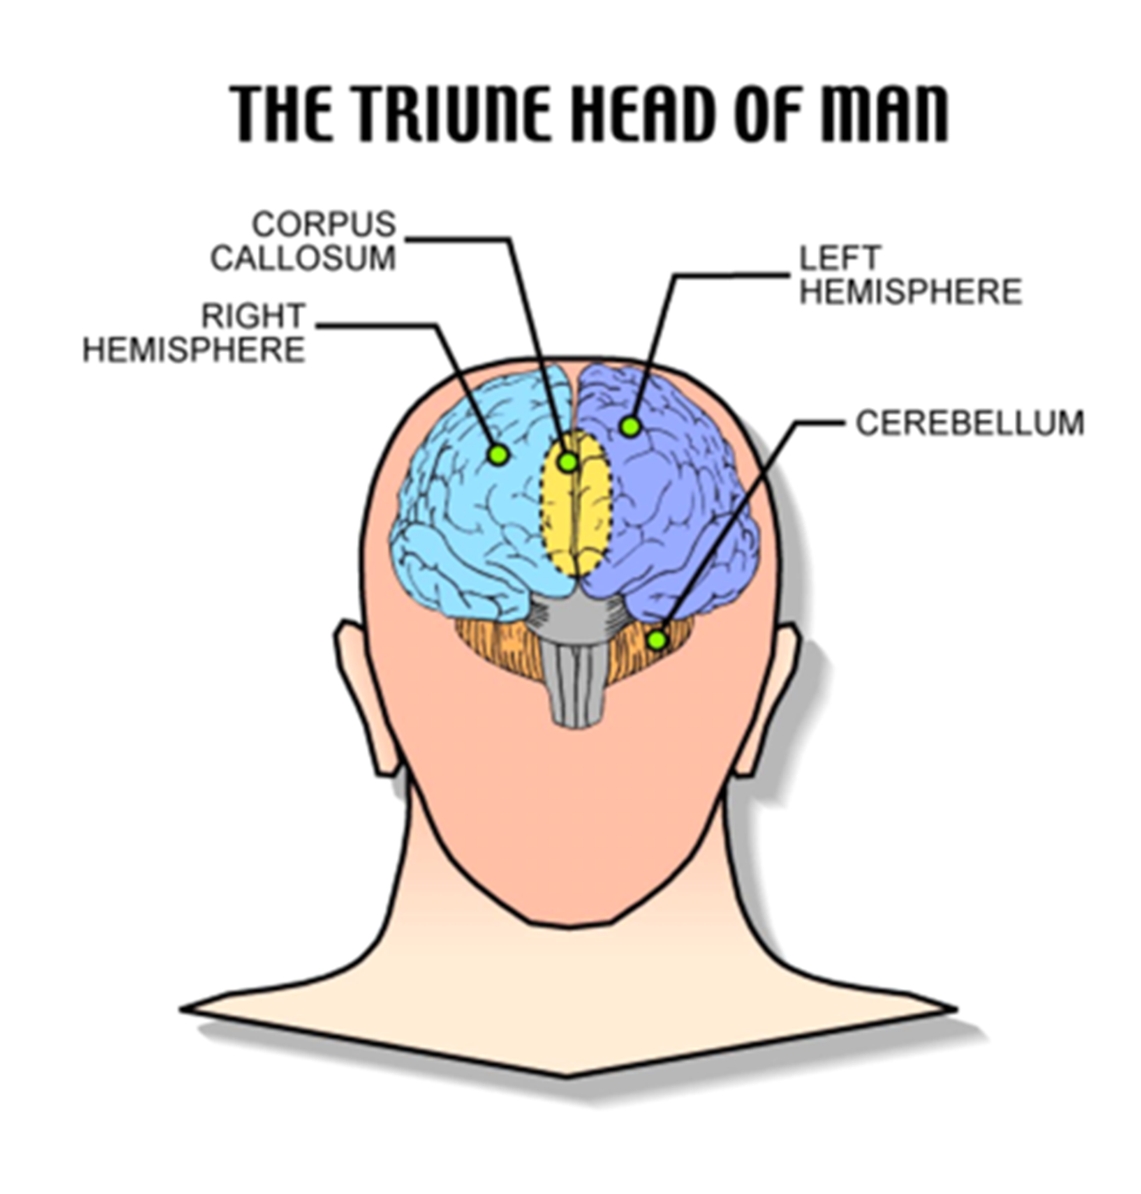 The Triune head of man